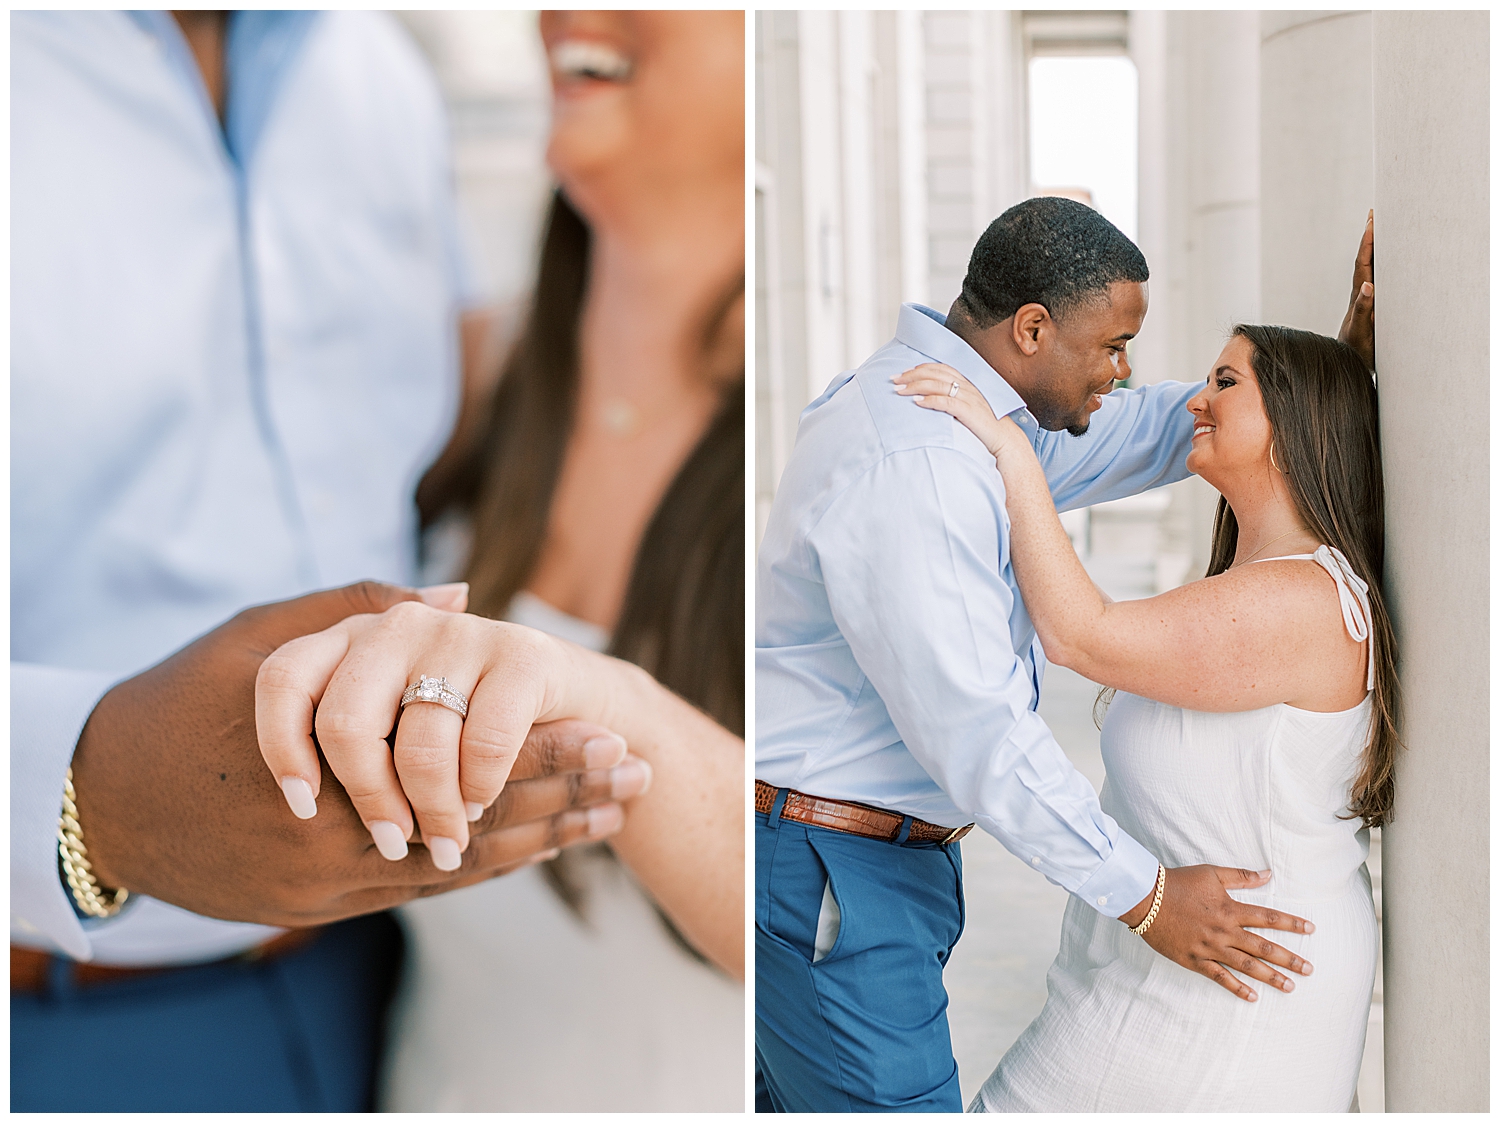 An engagement ring is shown by a joyful couple.